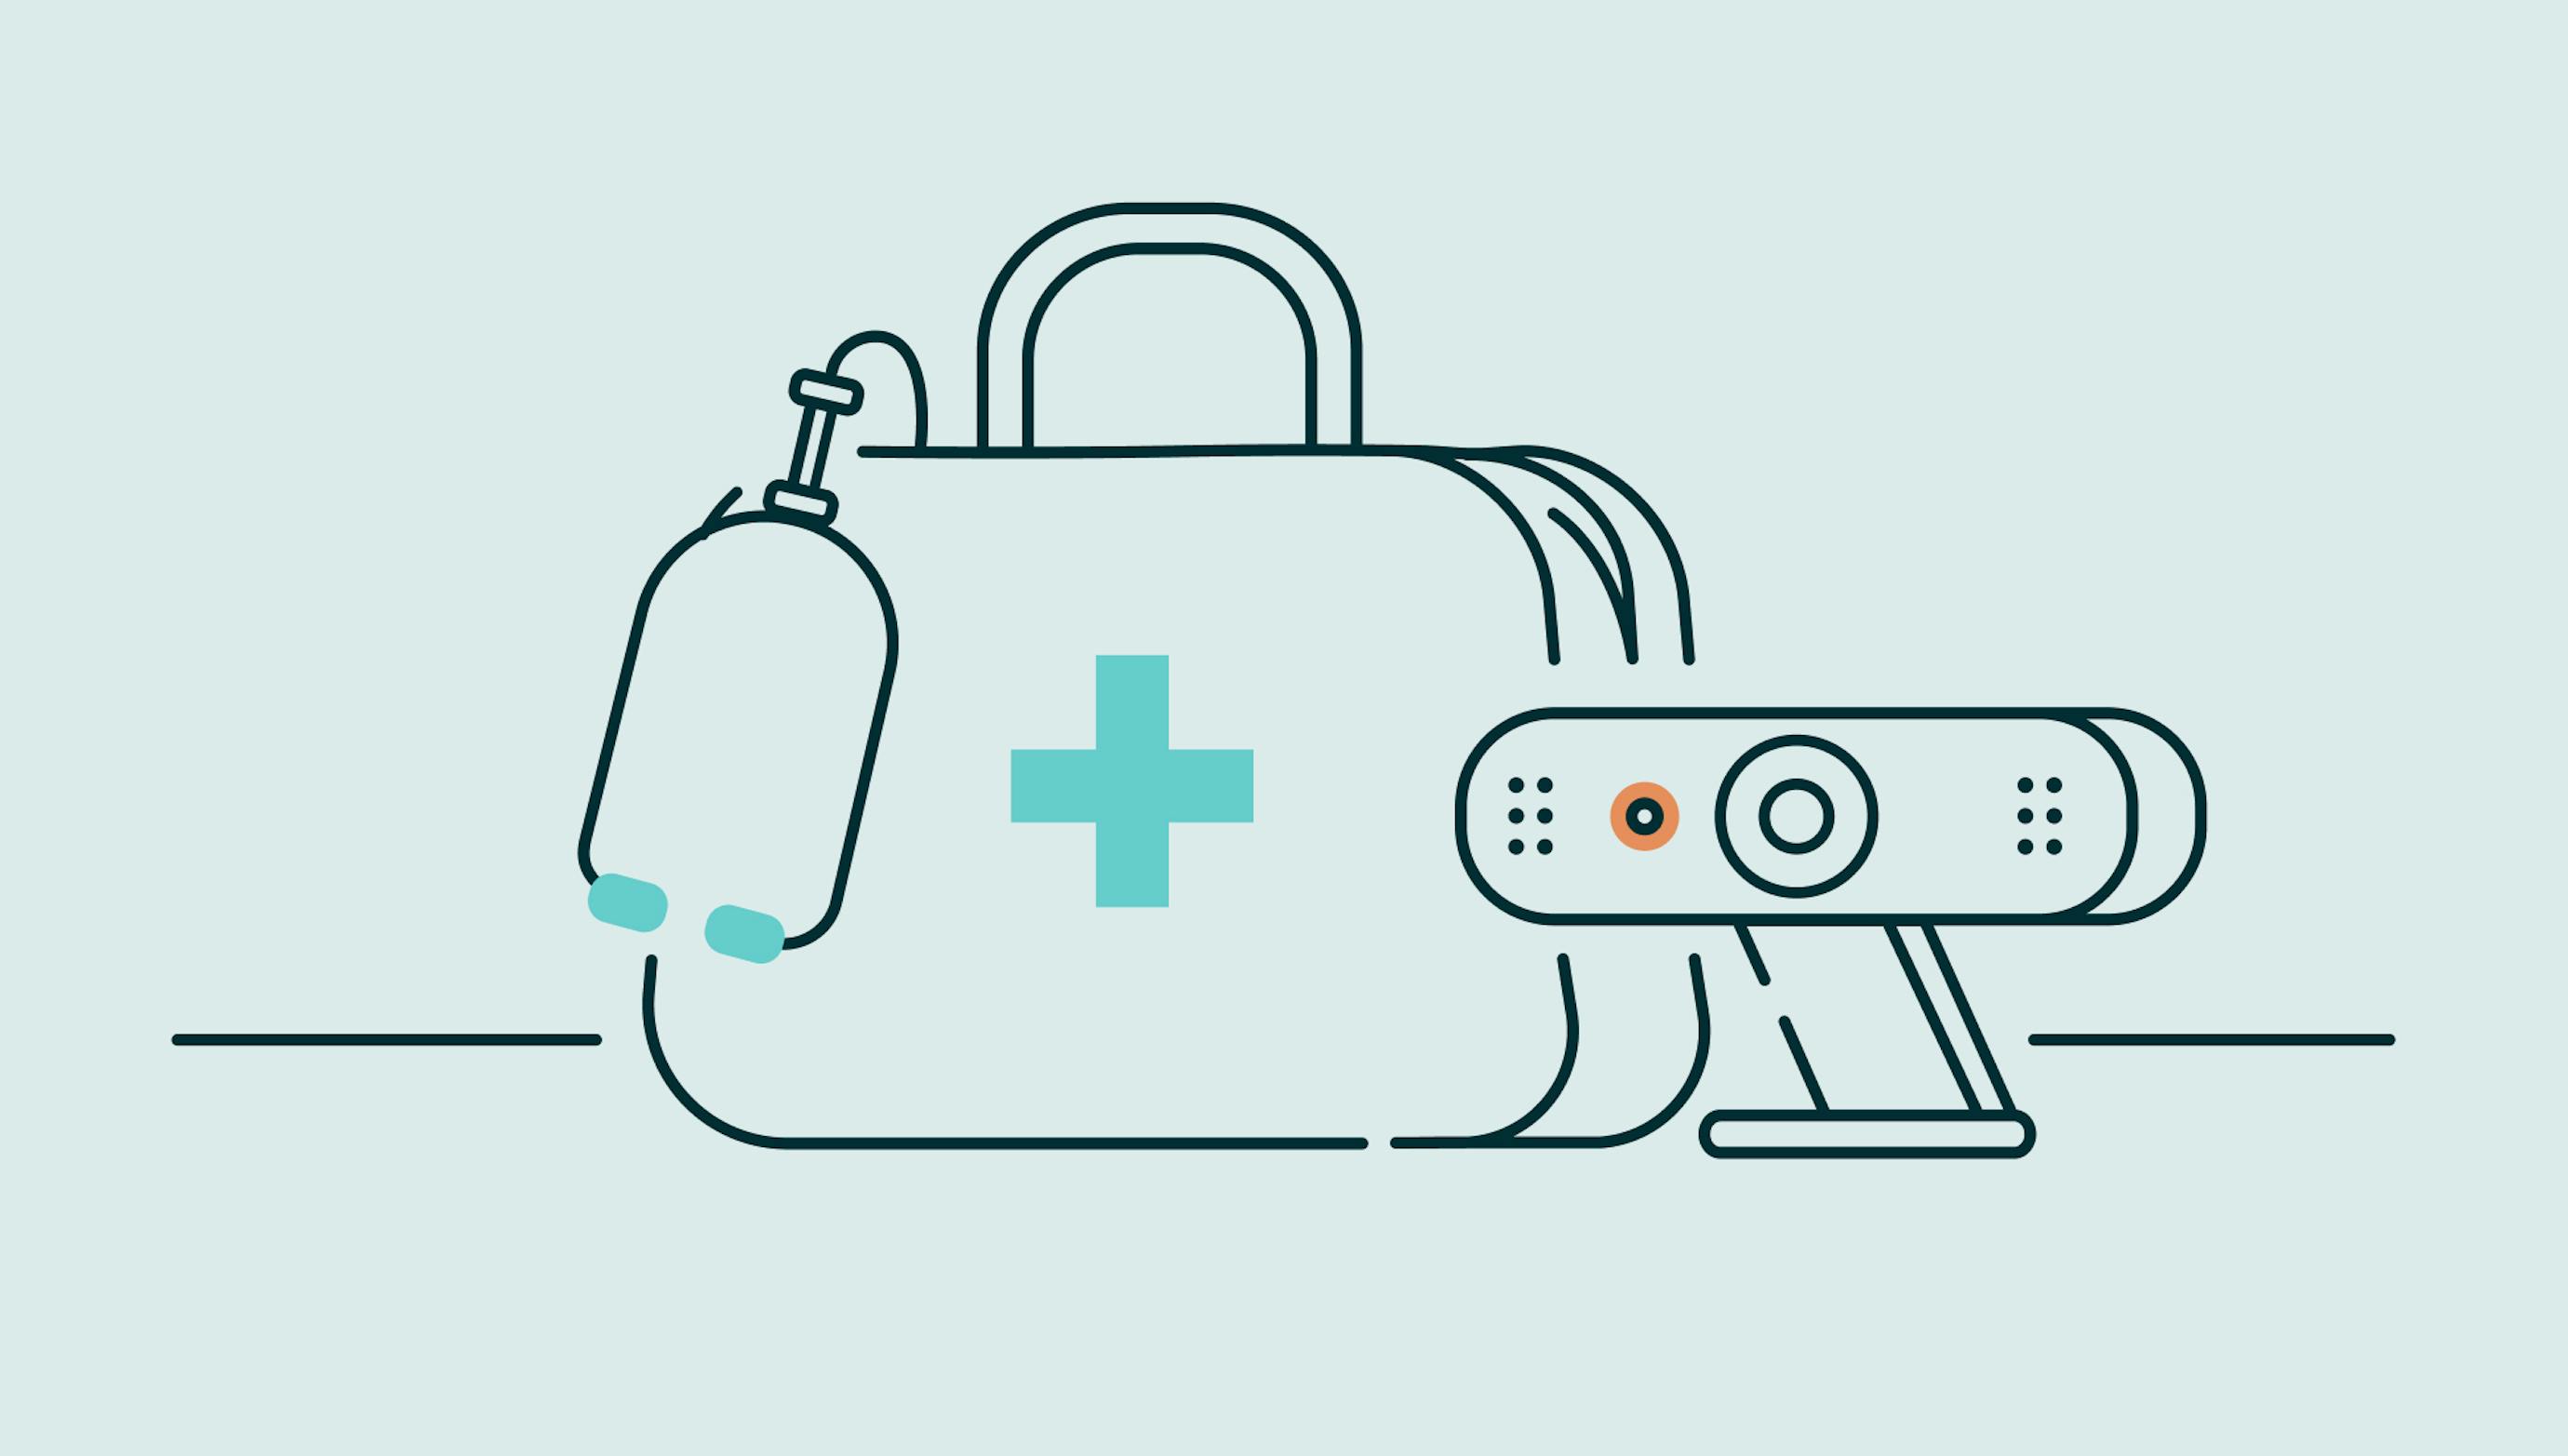 Illustration for the end of public health emergency showing a webcam and a medical bag